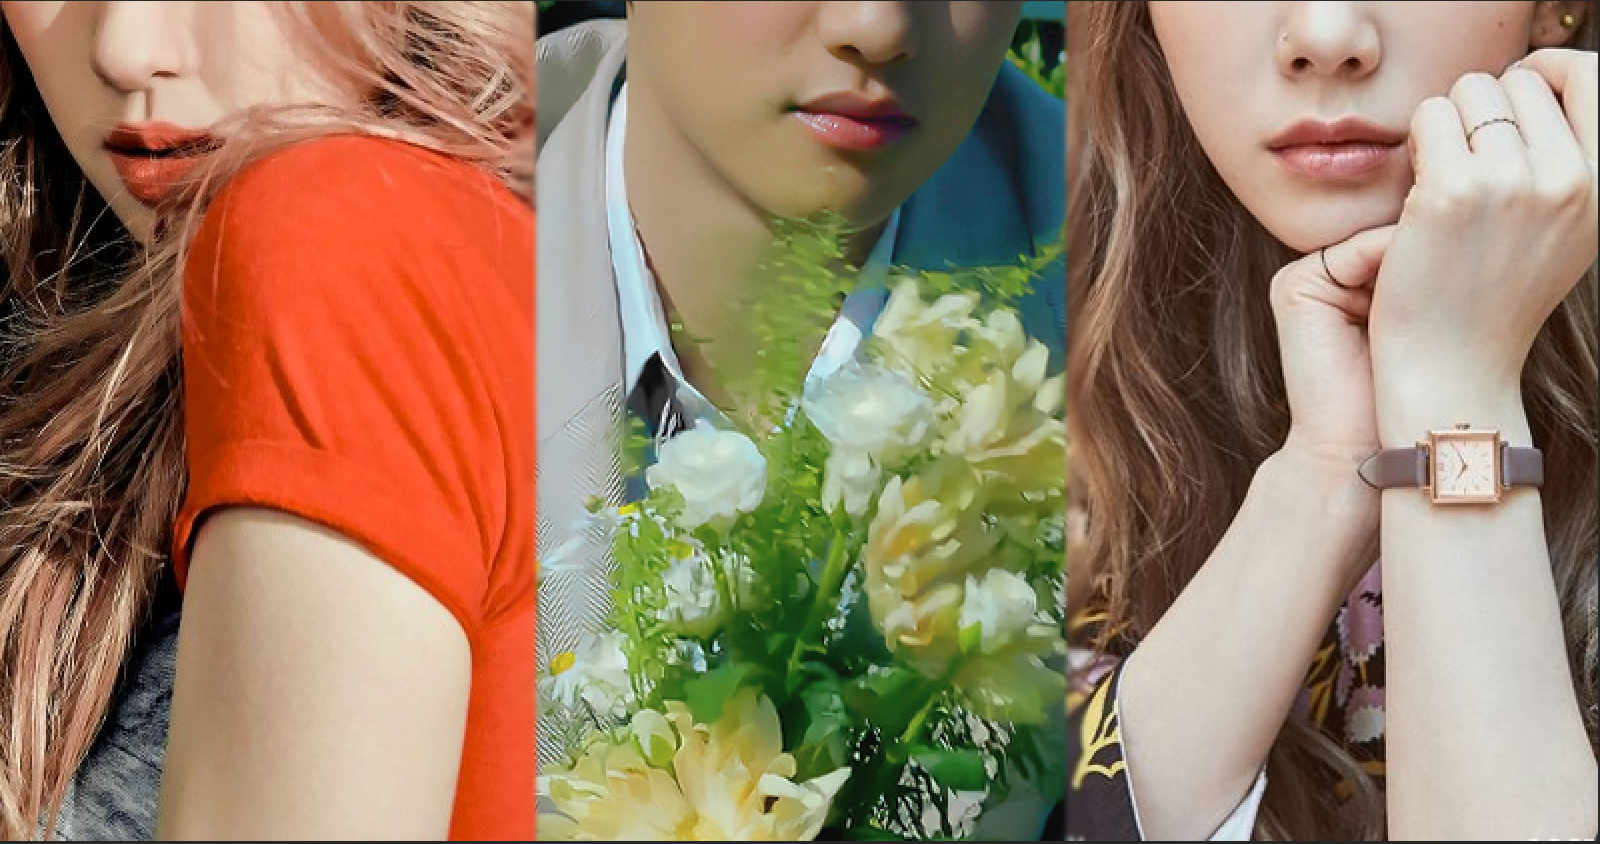 Top 8 K-Pop Songs to Add Perfect For Acoustic Lovers